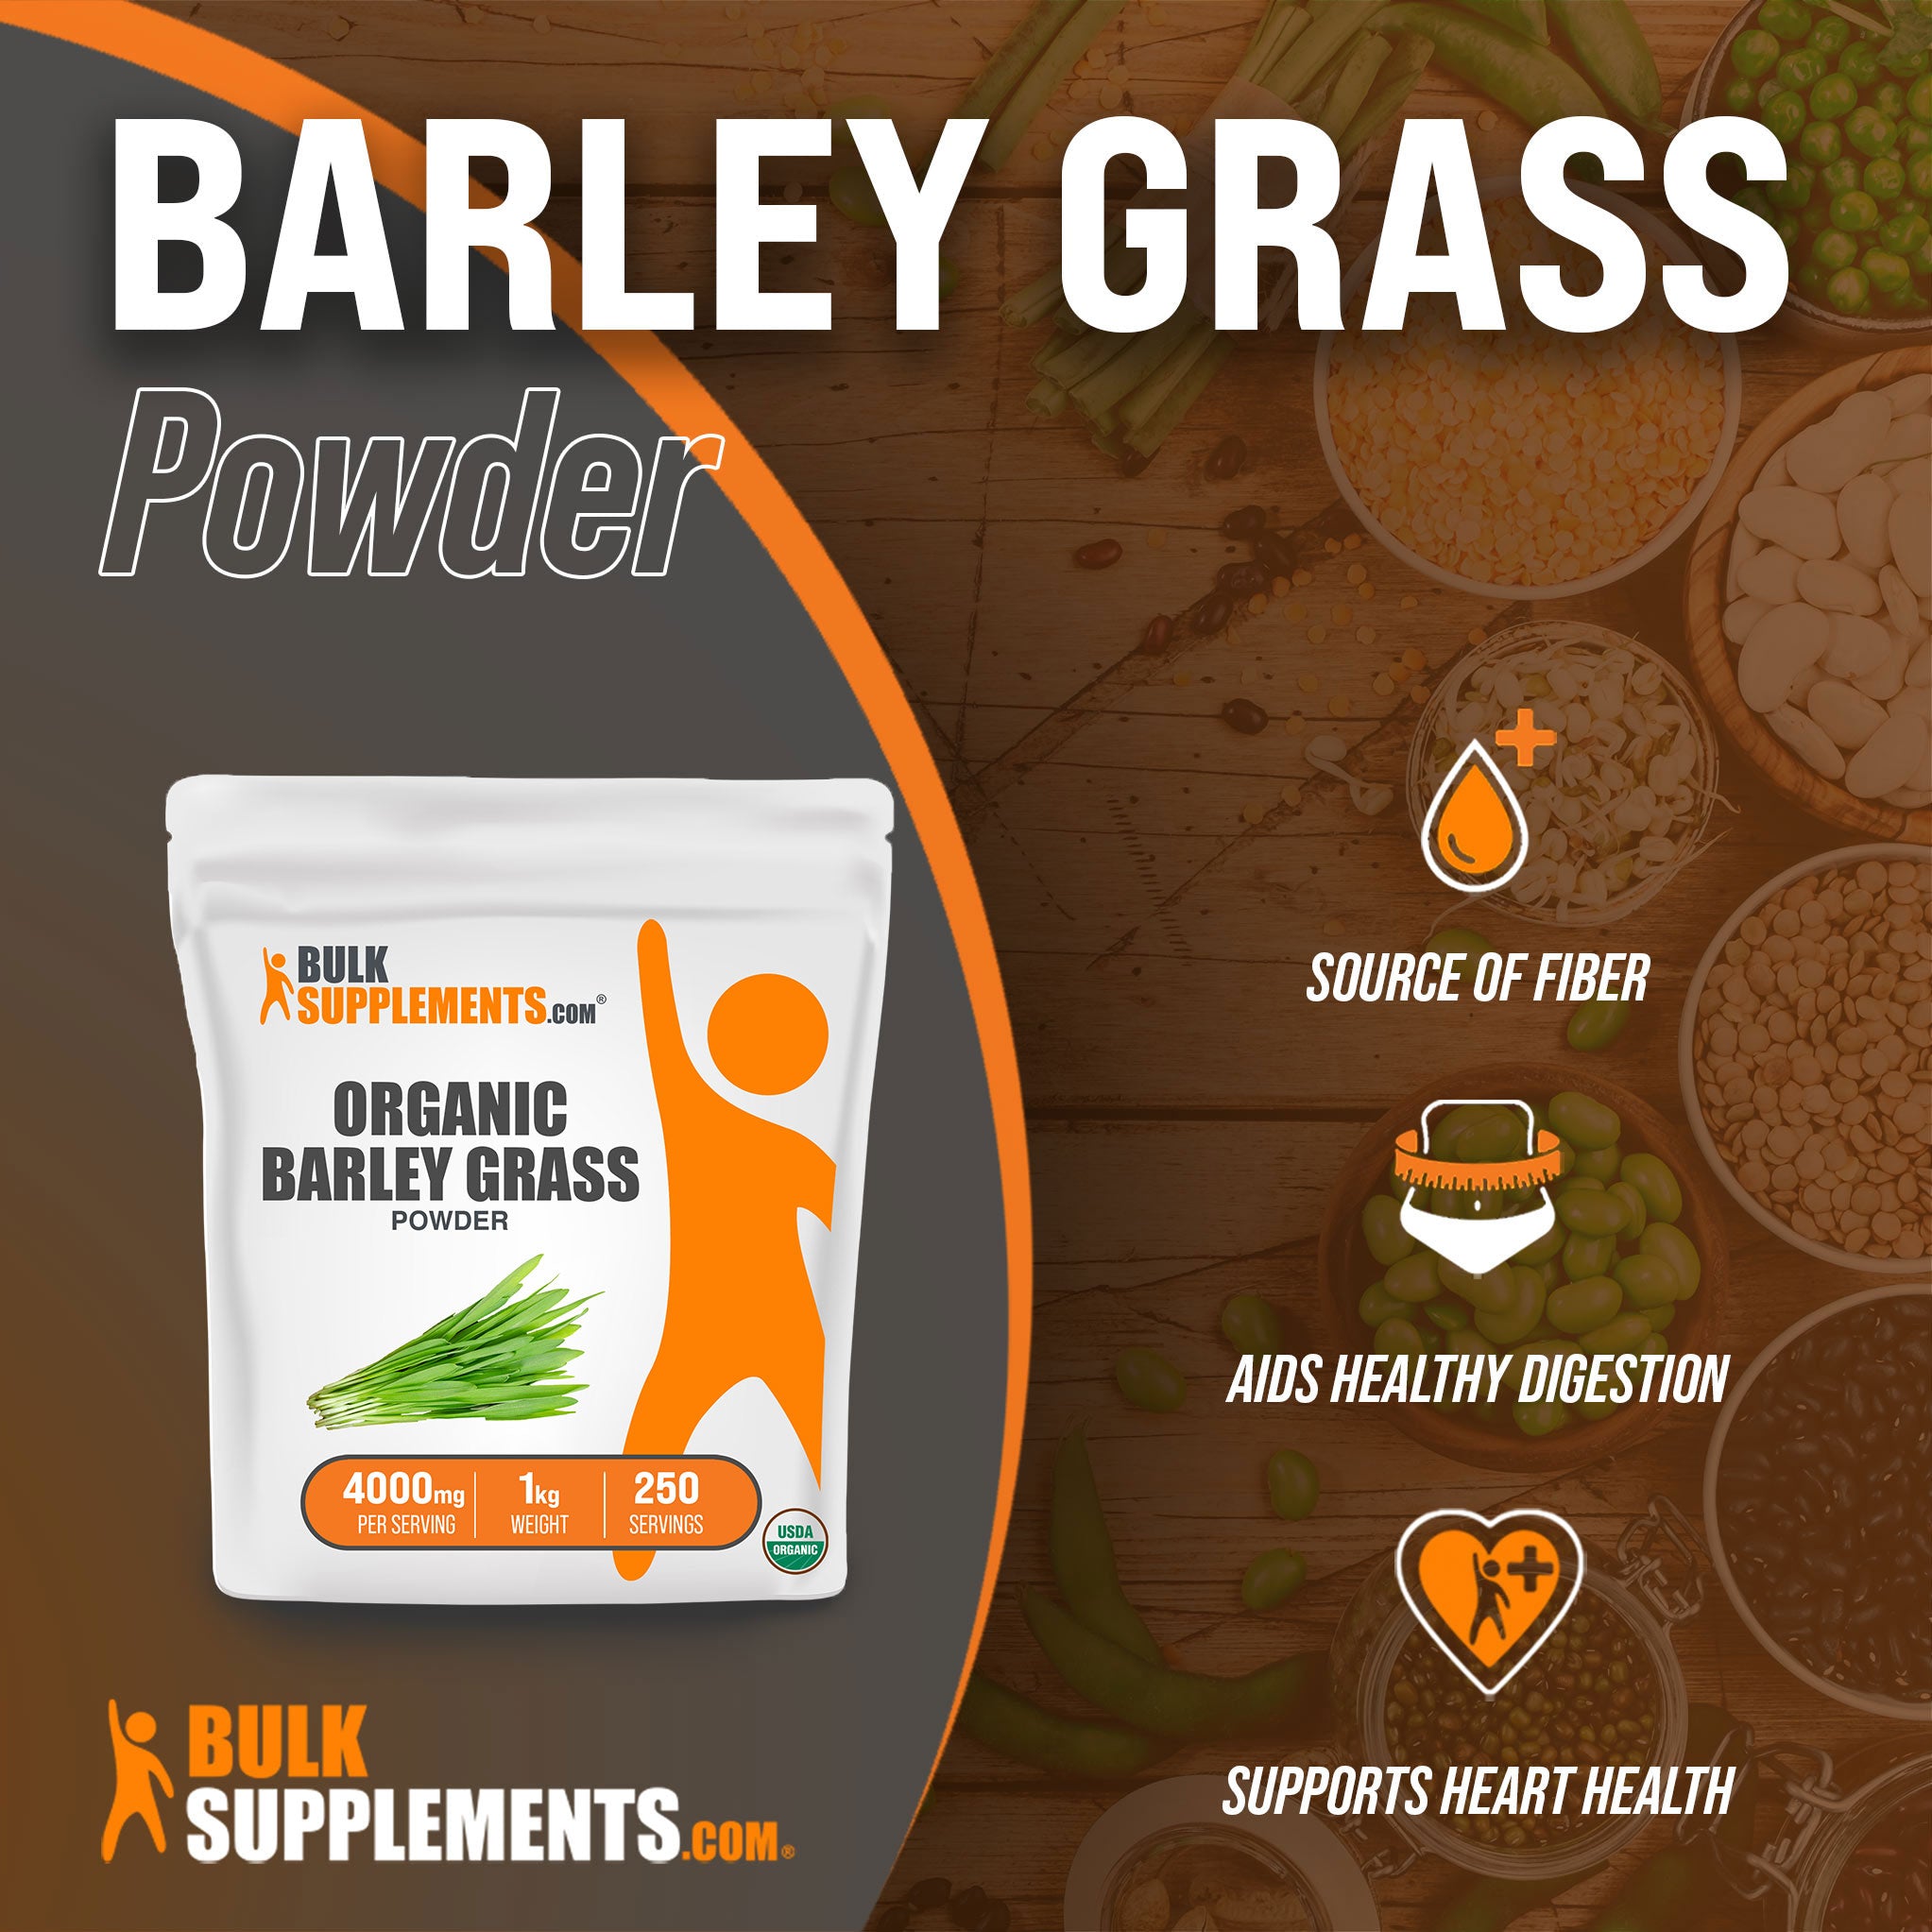 Organic Barley Grass Powder from Bulk Supplements for a healthy heart and digestion